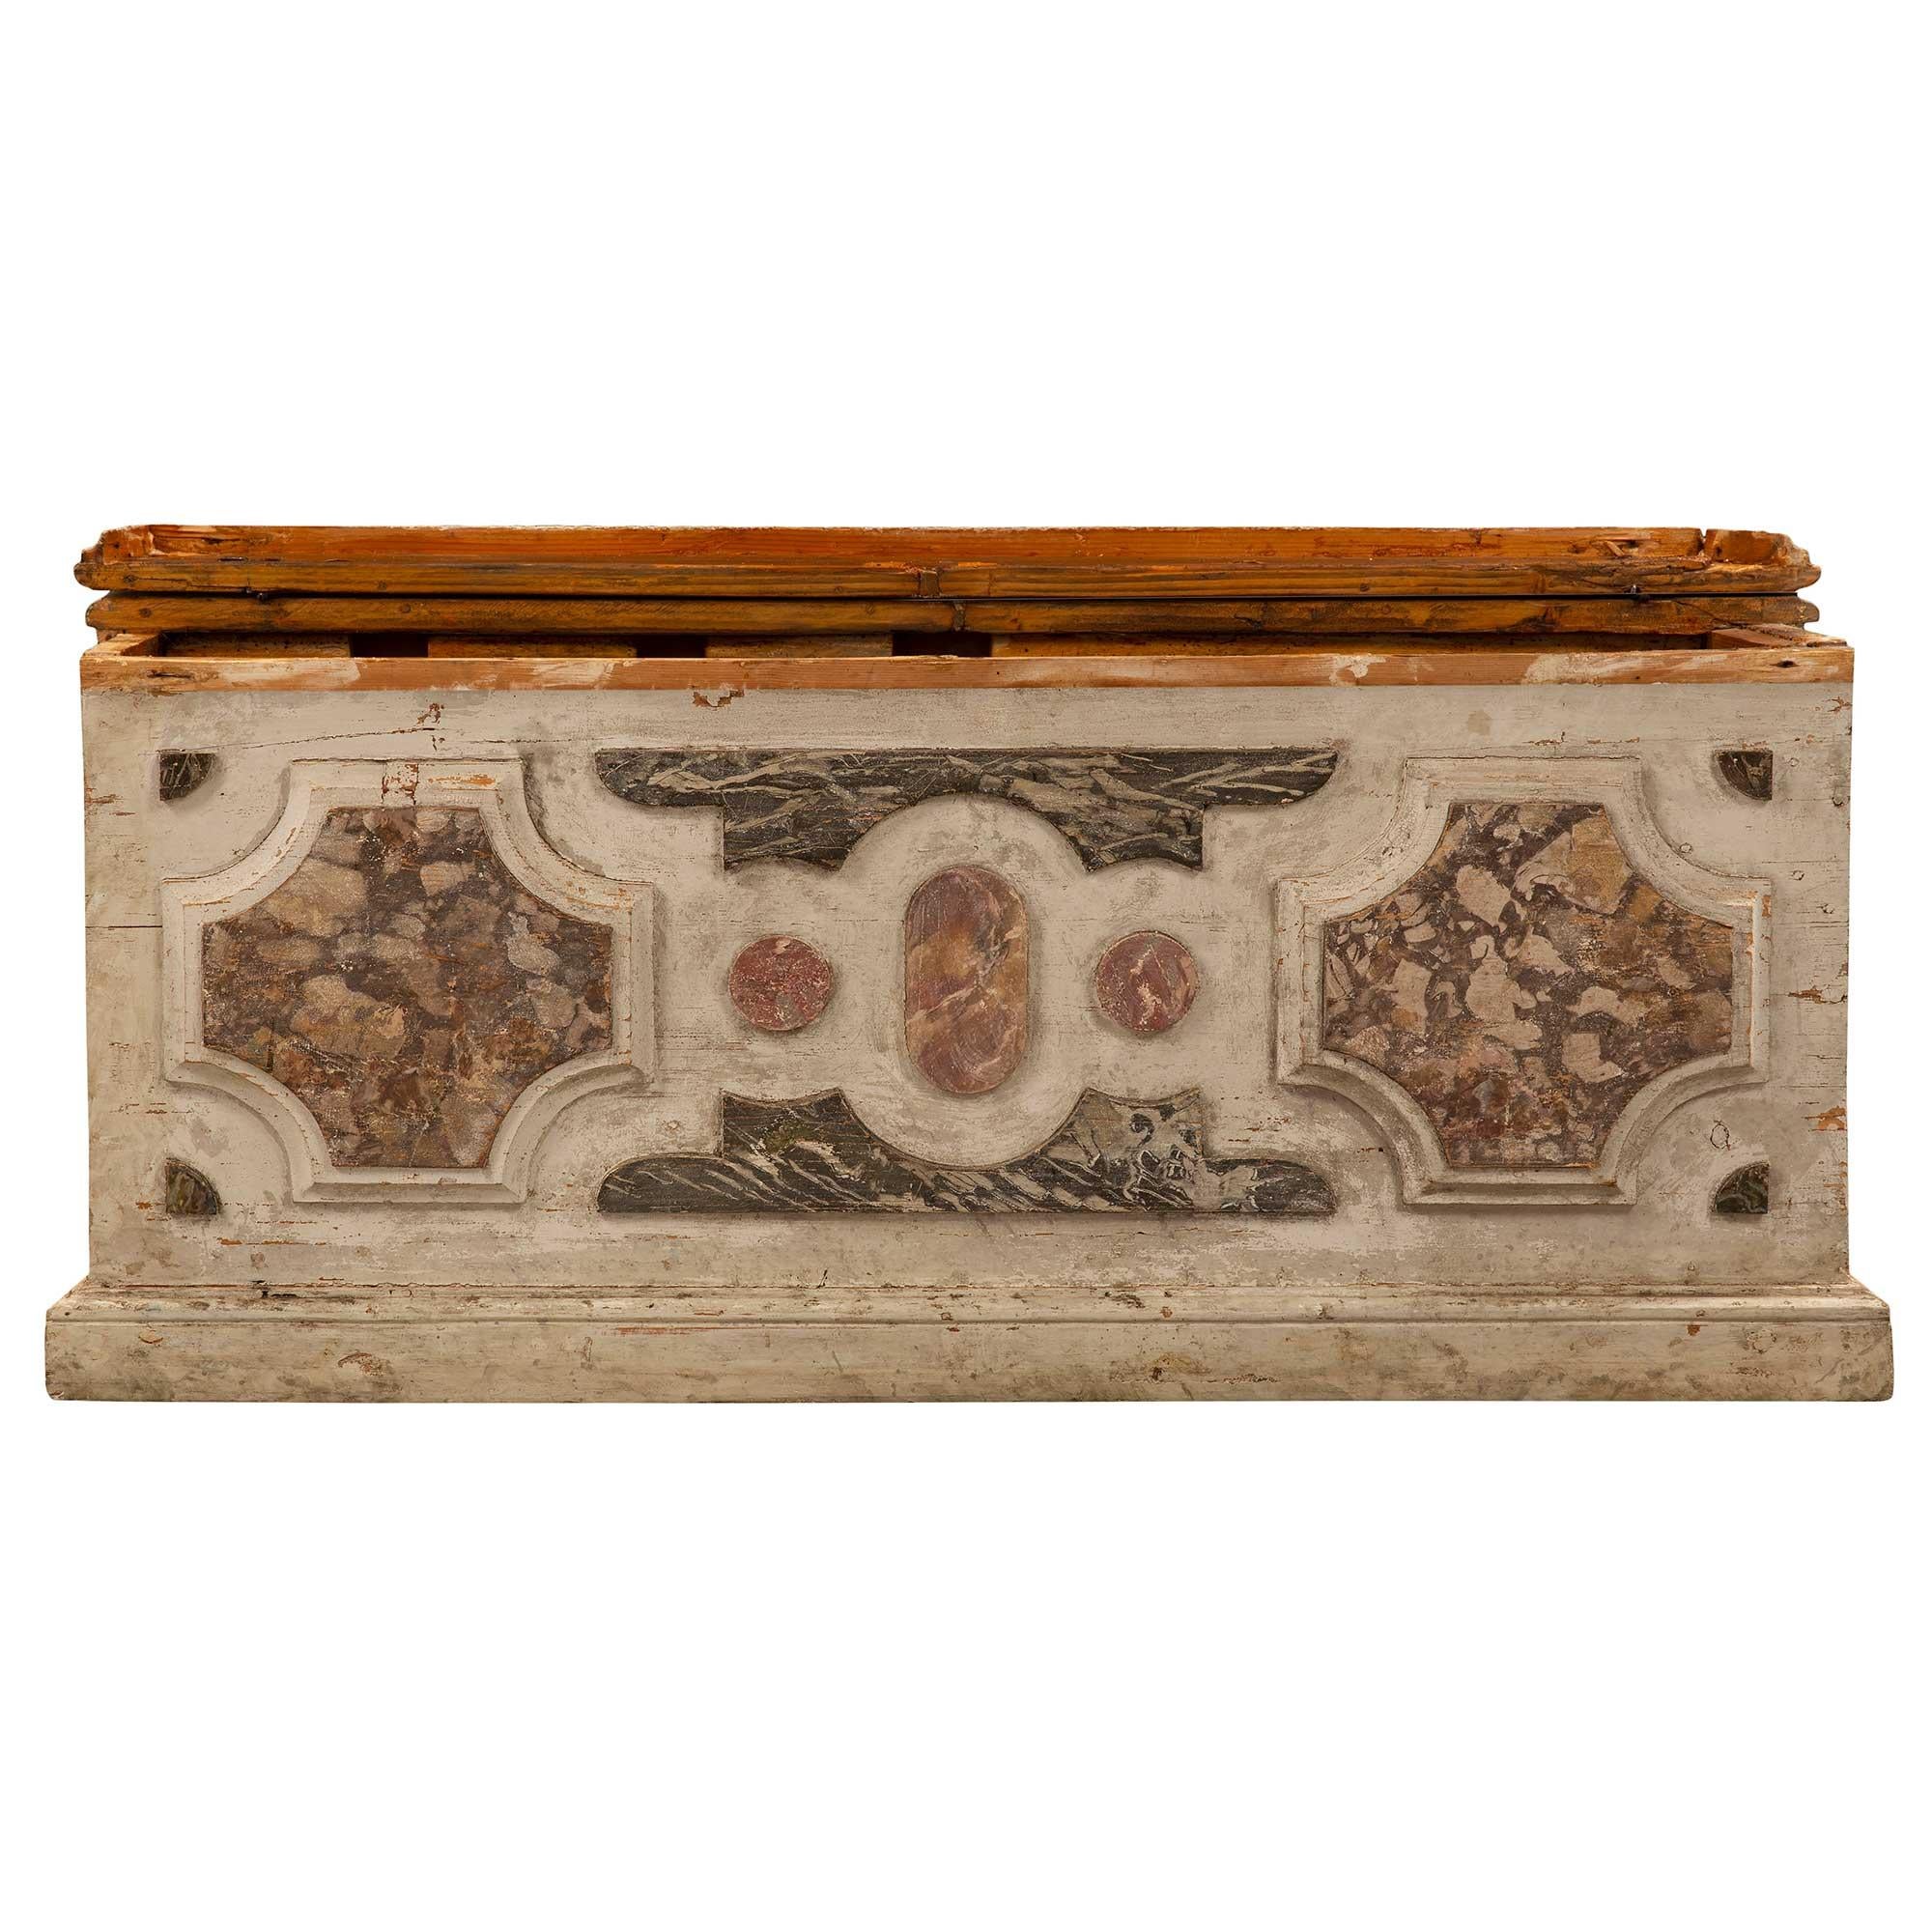 Italian 18th Century Louis XVI Period Patinated and Faux Marble Storage Benches In Good Condition For Sale In West Palm Beach, FL